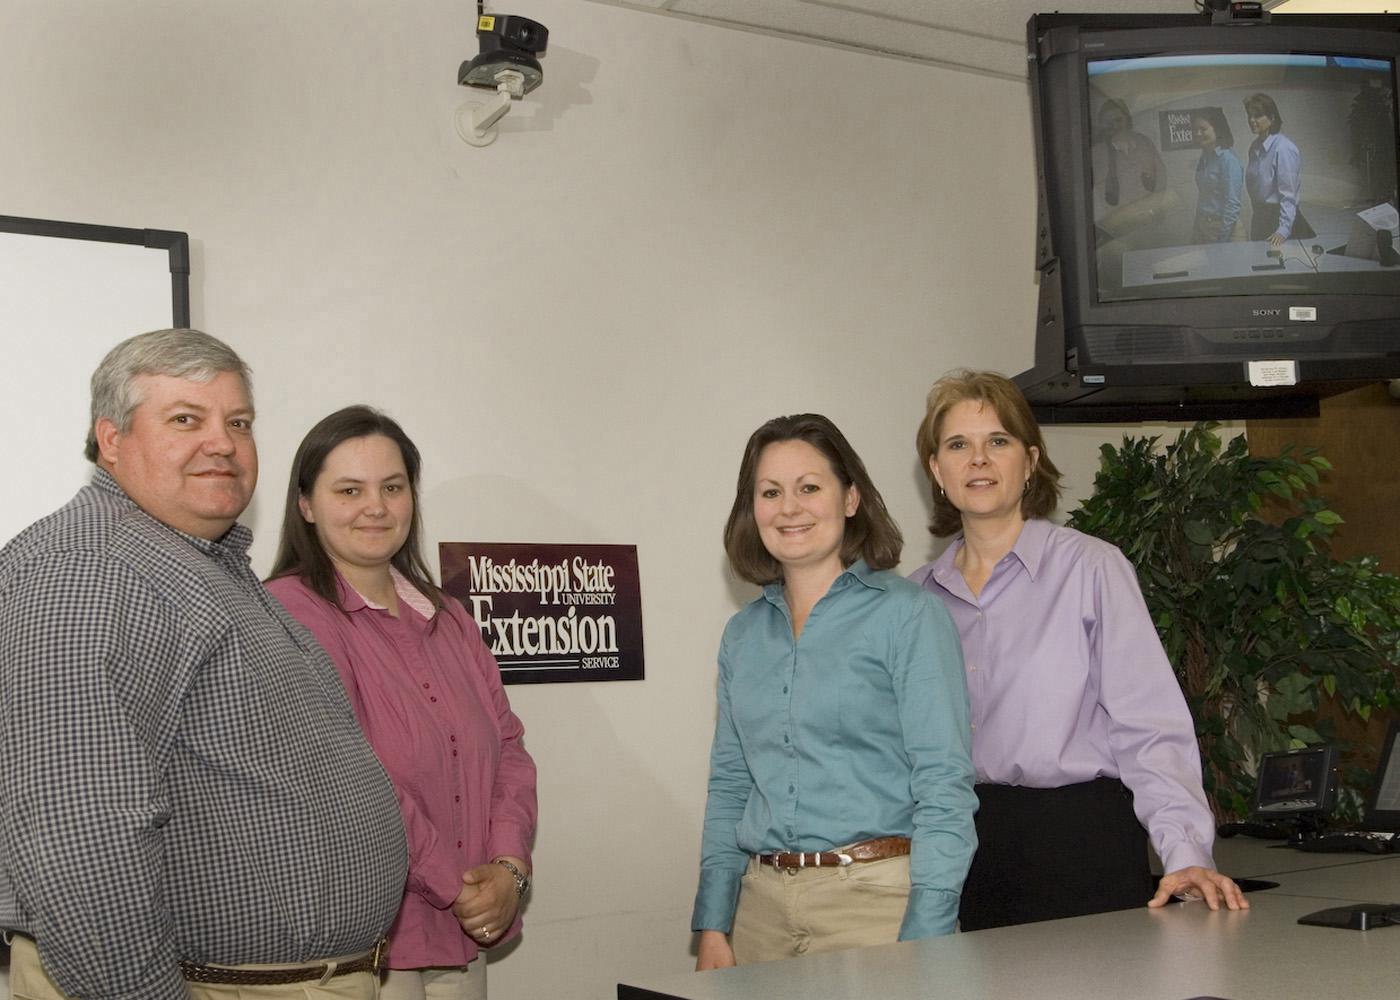 The MSU Extension Service distance education program team members include (from left) Steve Hankins, Susan Fulgham, Jane Parish and Susan Seal. (Photo by Marco Nicovich) See larger view.